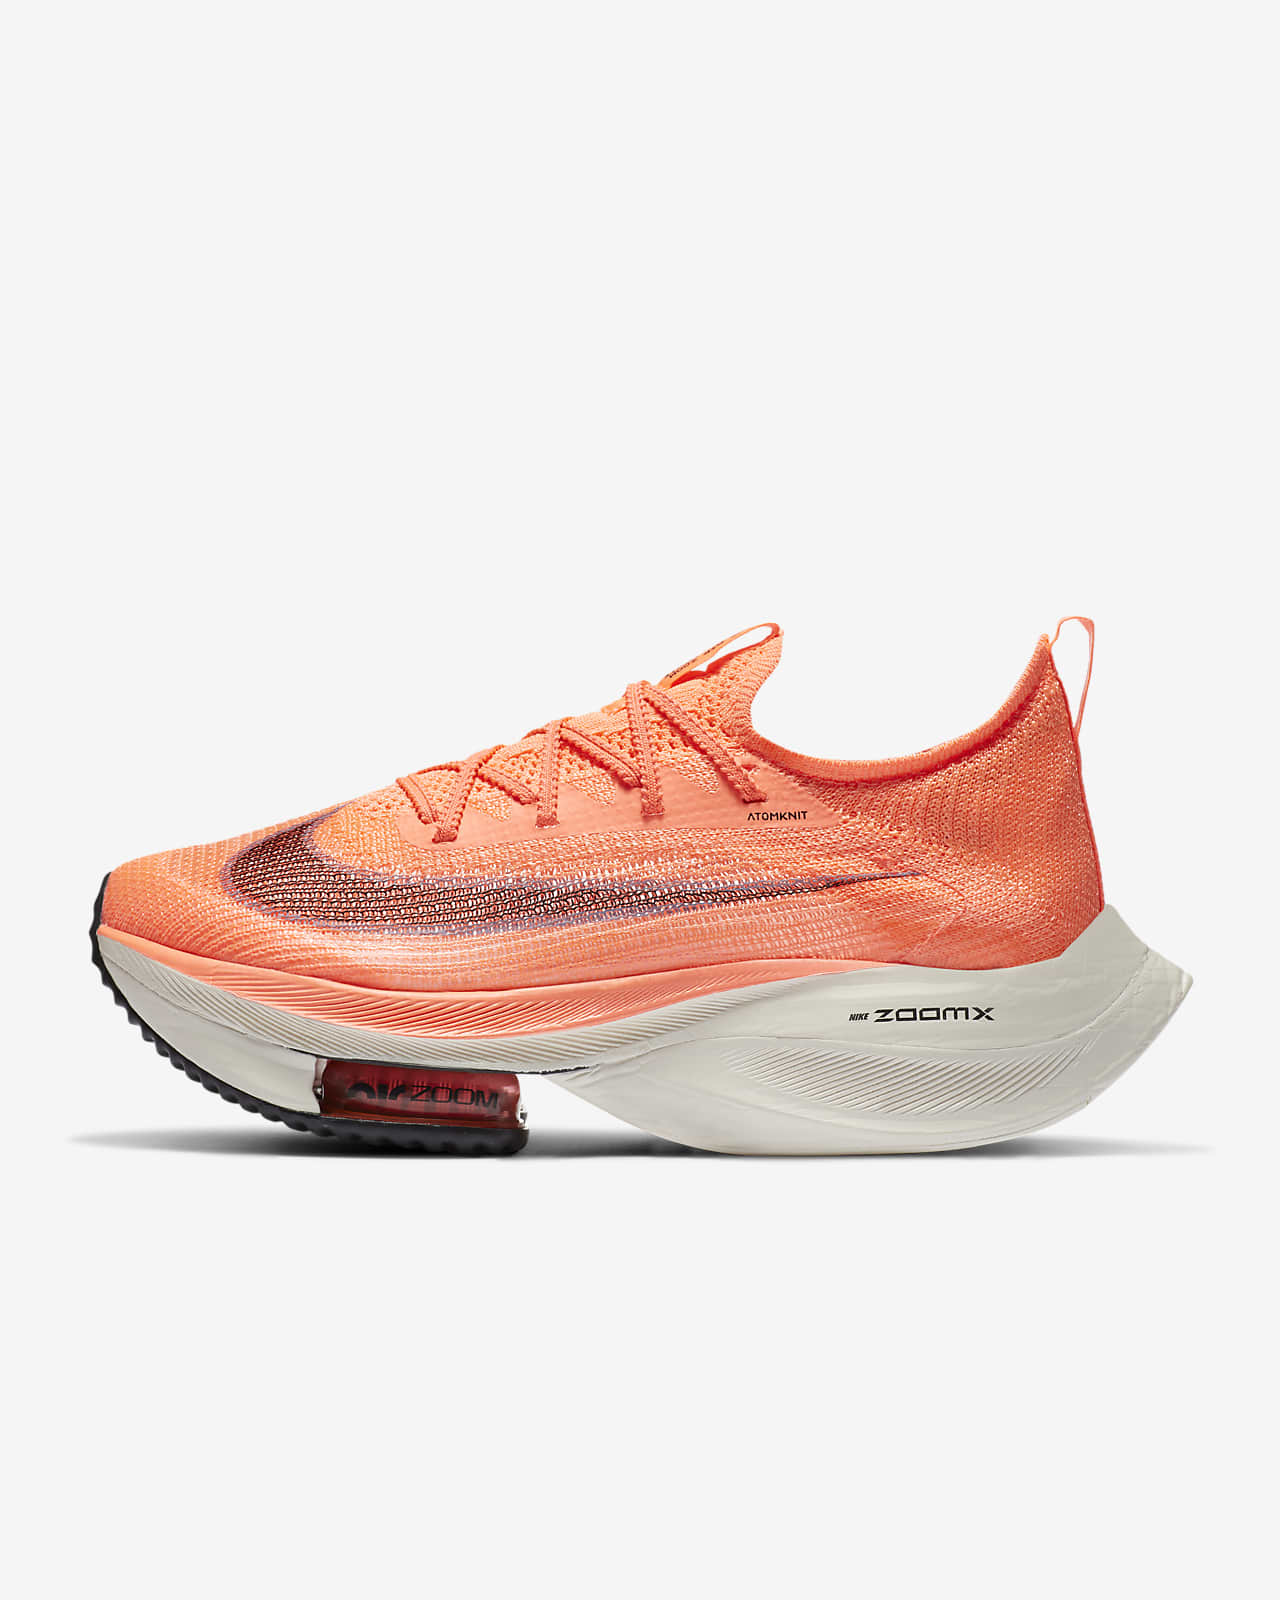 nike zoomx fly next